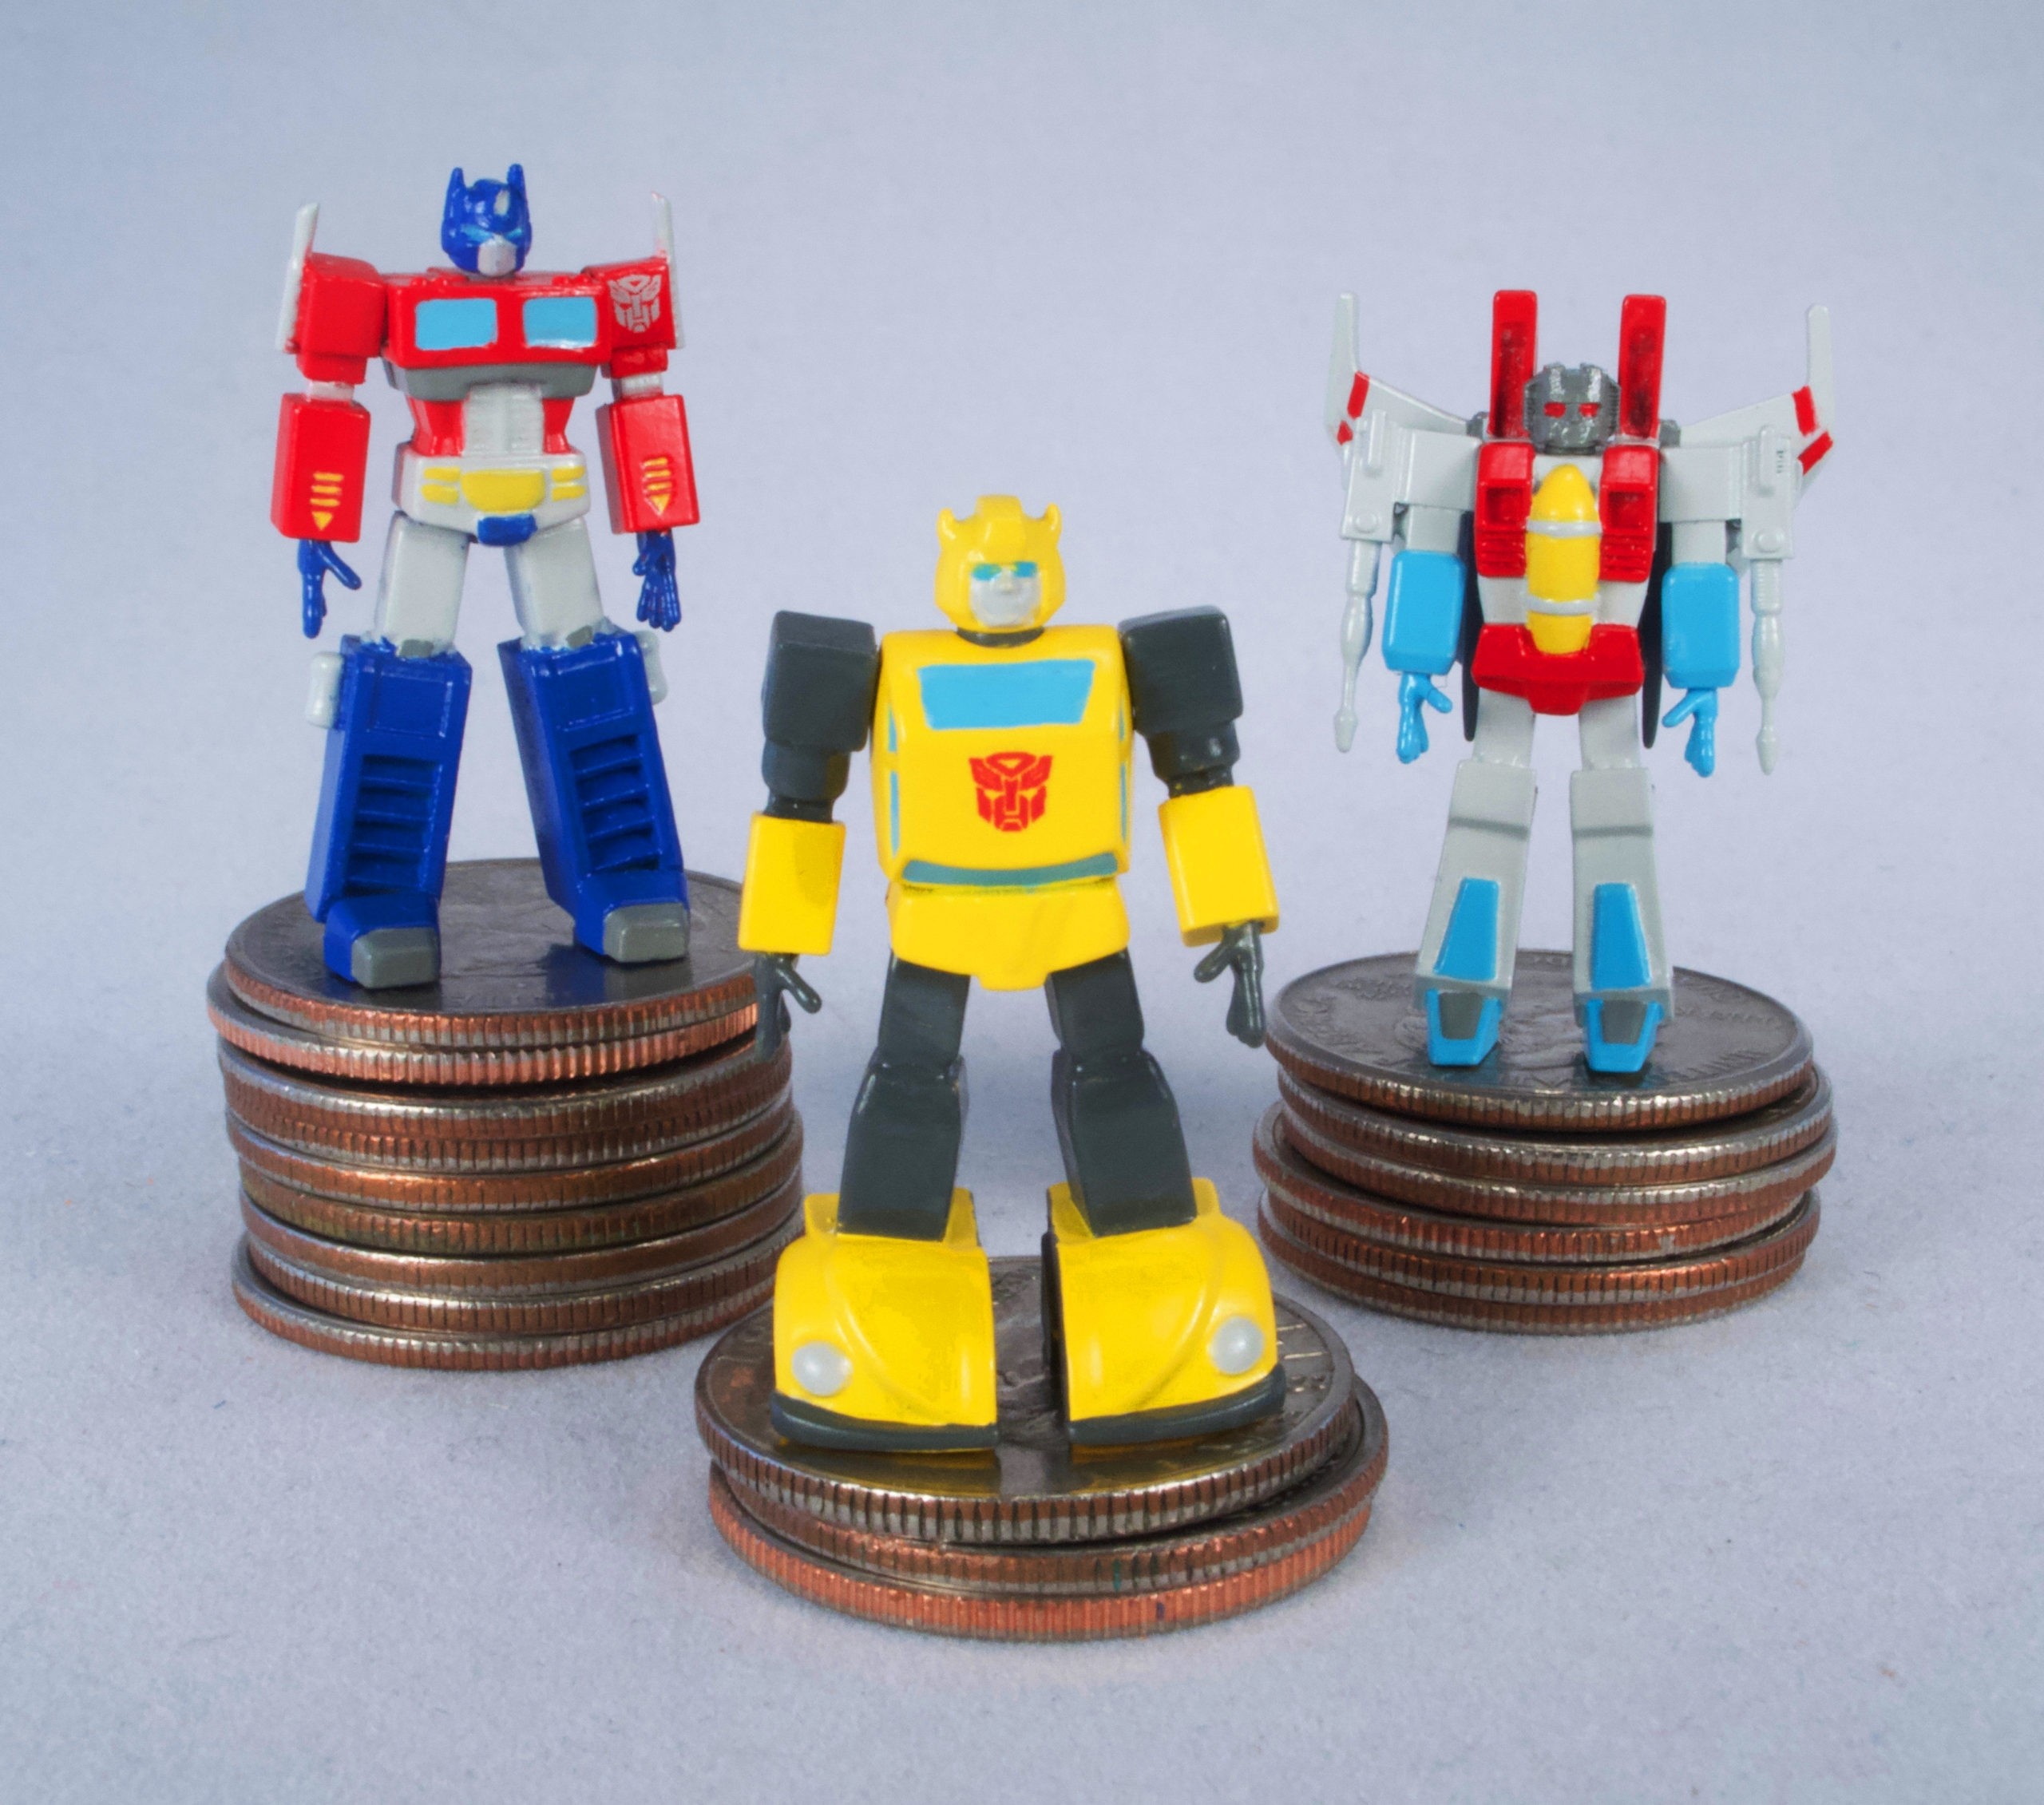 Transformers Generation 1 - World's Smallest Micro Figures Assorted (Box of 12) (0423)